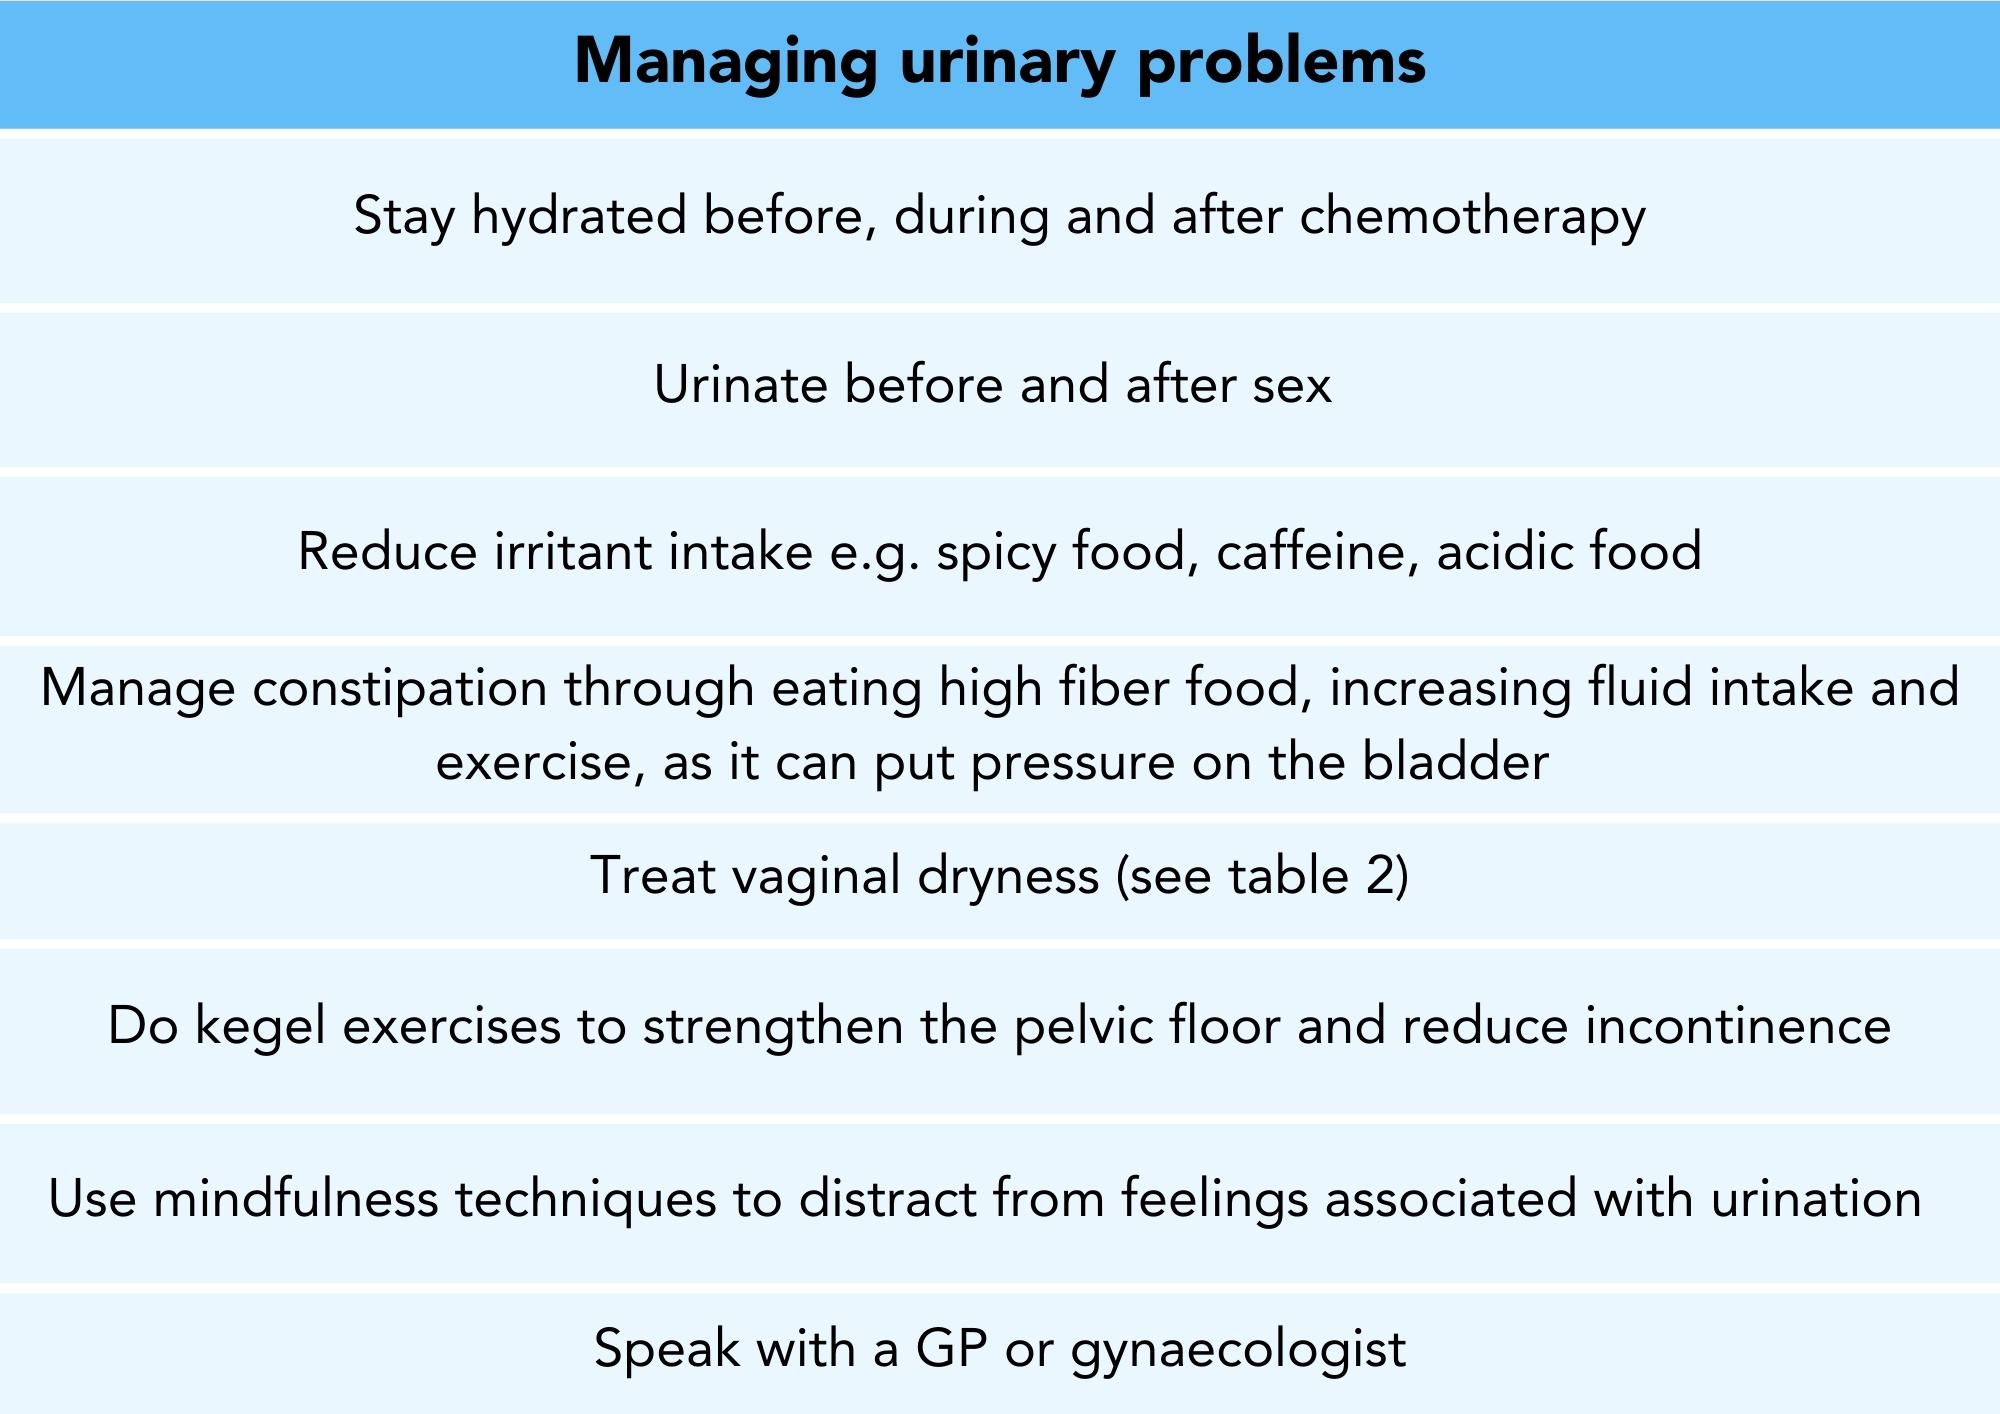 Techniques to managed urinary problems cause by breast cancer treatment